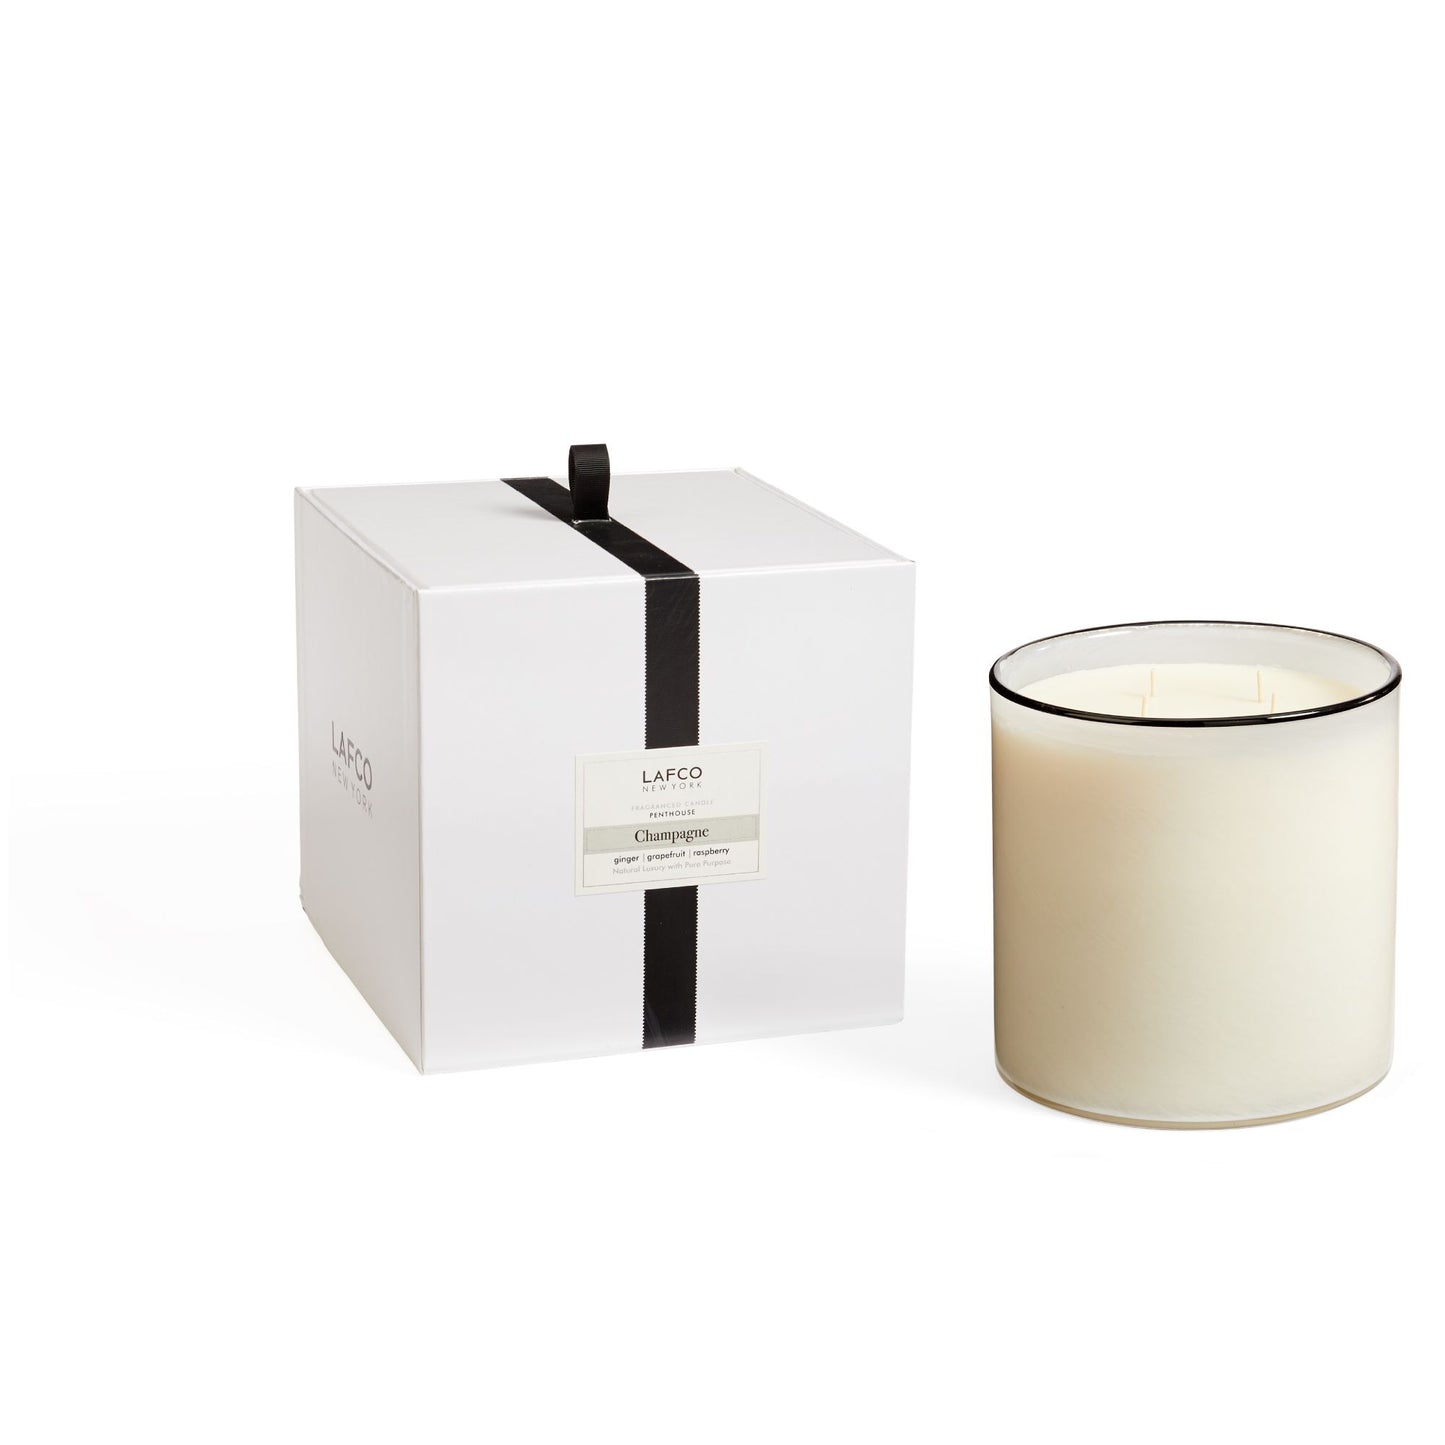 86oz Candle - Champagne